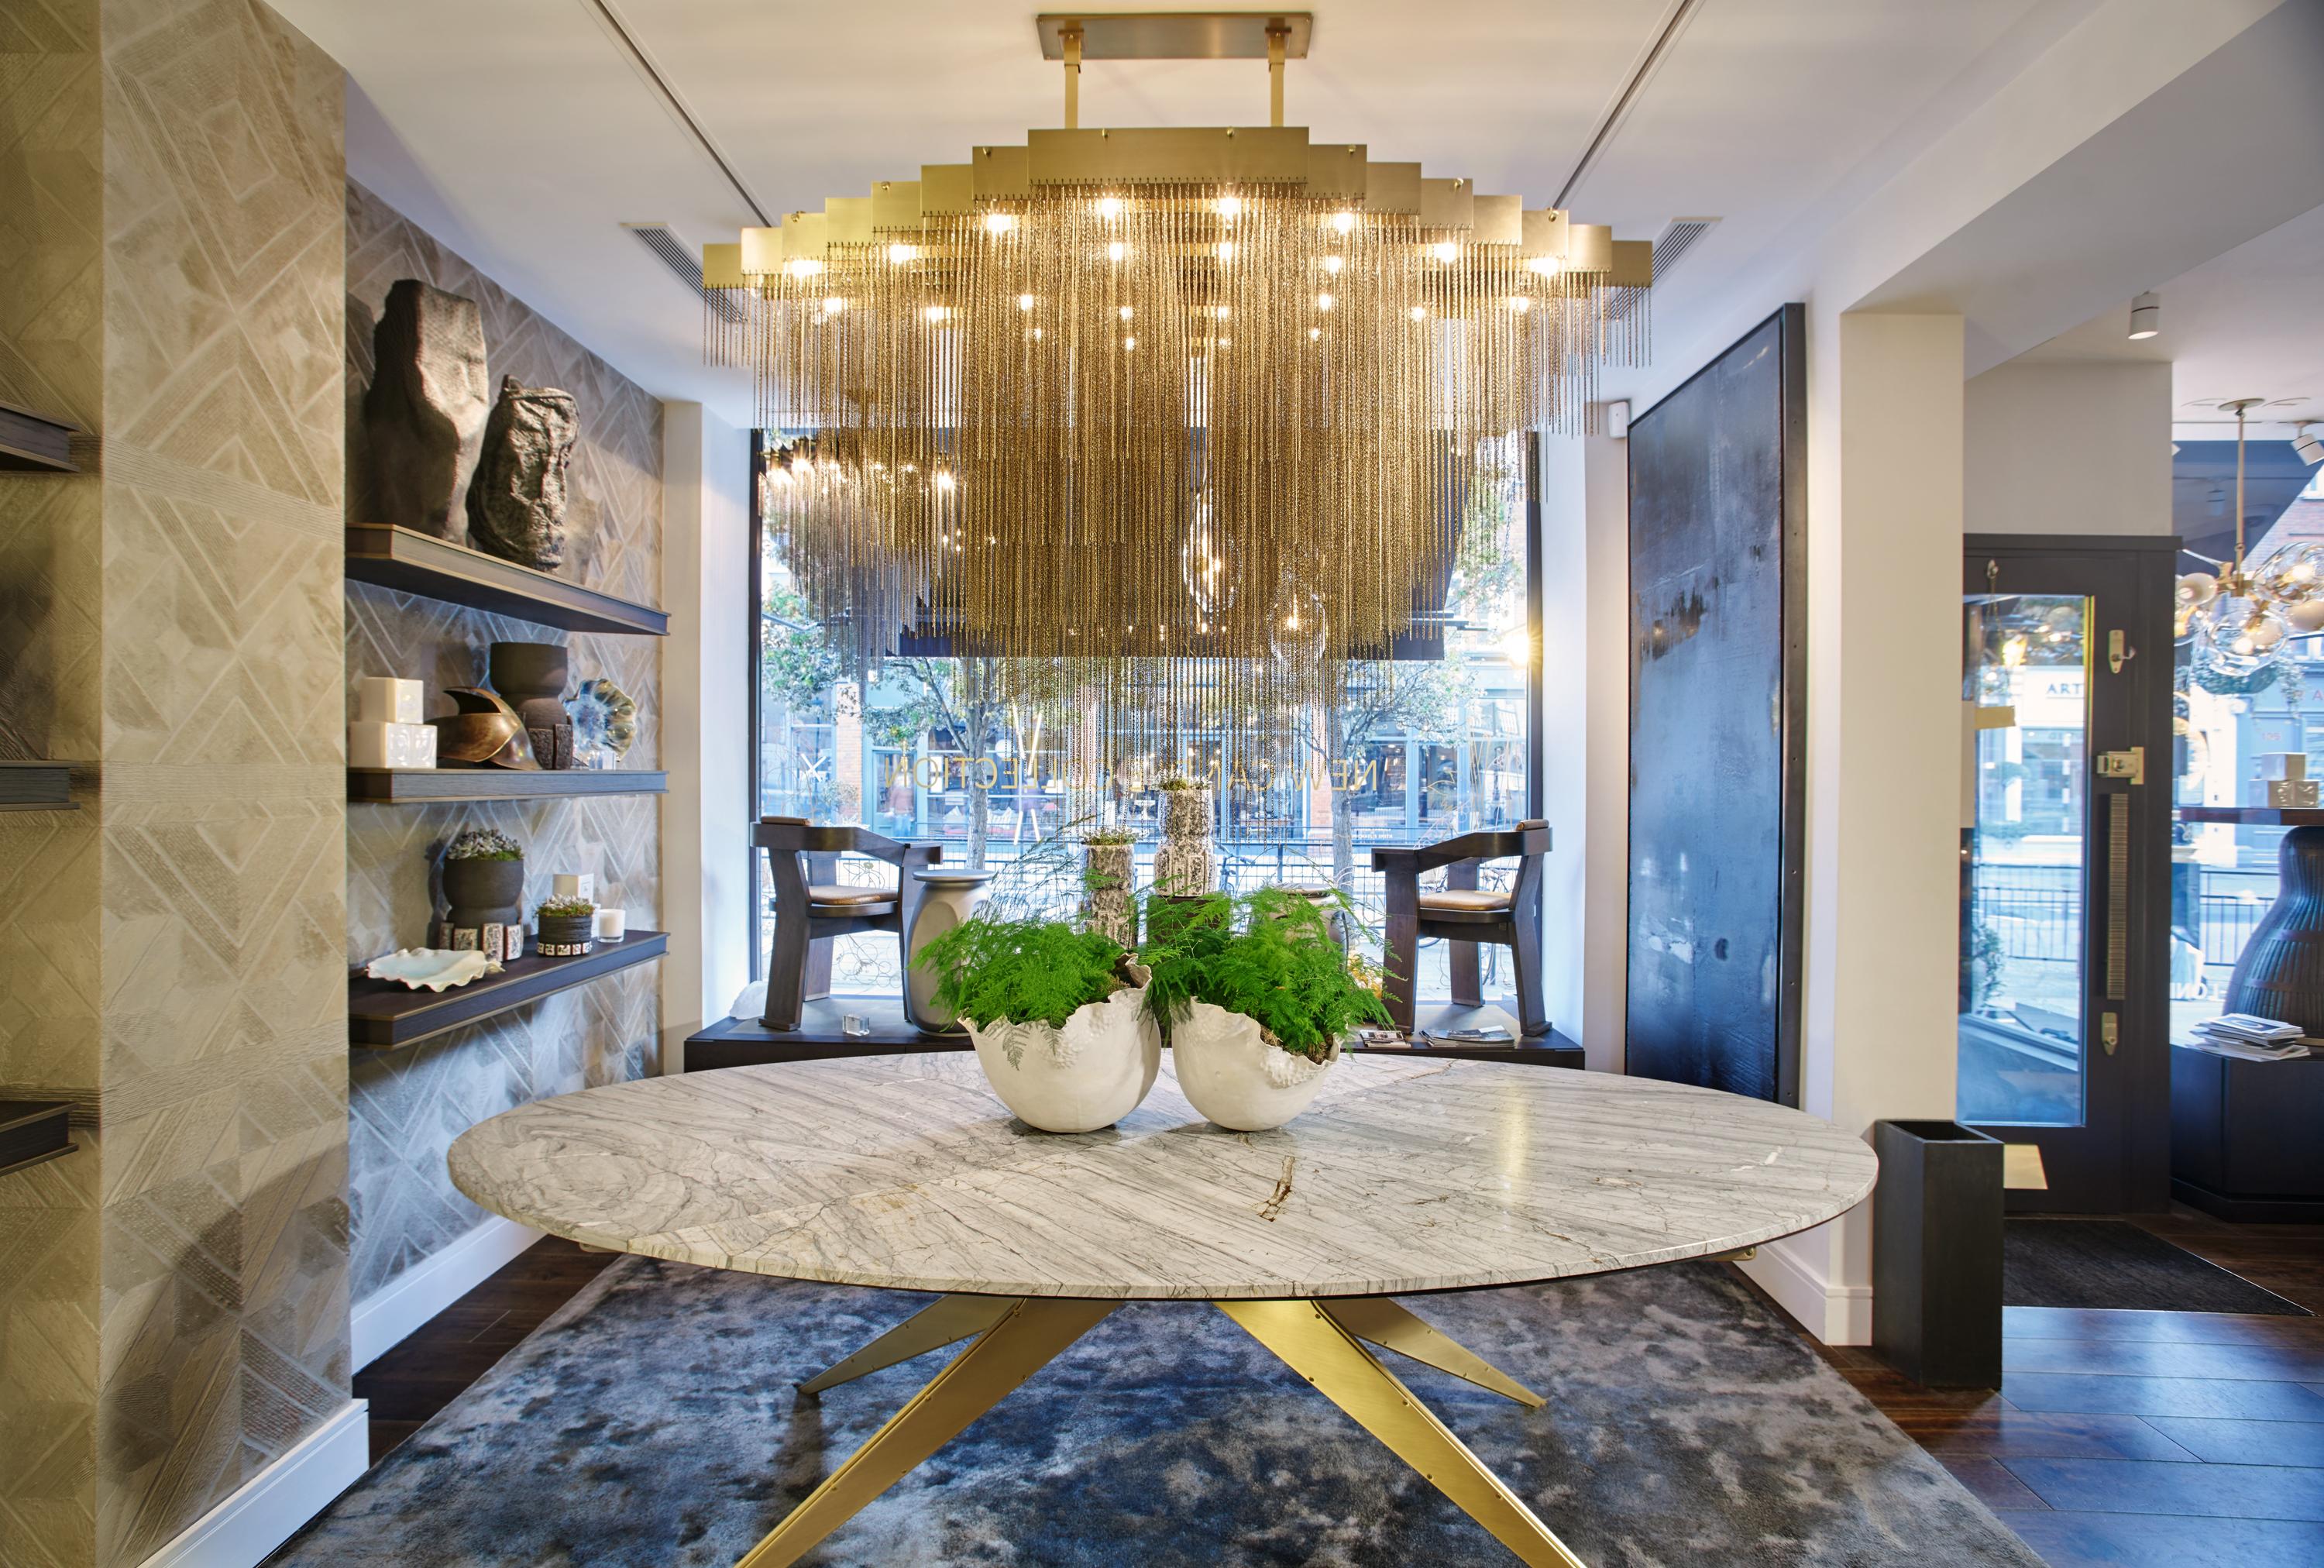 A chandelier that moves with glamorous intrigue, the Kelly chandelier’s metallic chain cascades through its various layers to create a glisten reflective effect. A bold synergy of cold metal with warm light, the black or brass frame hosts a matching